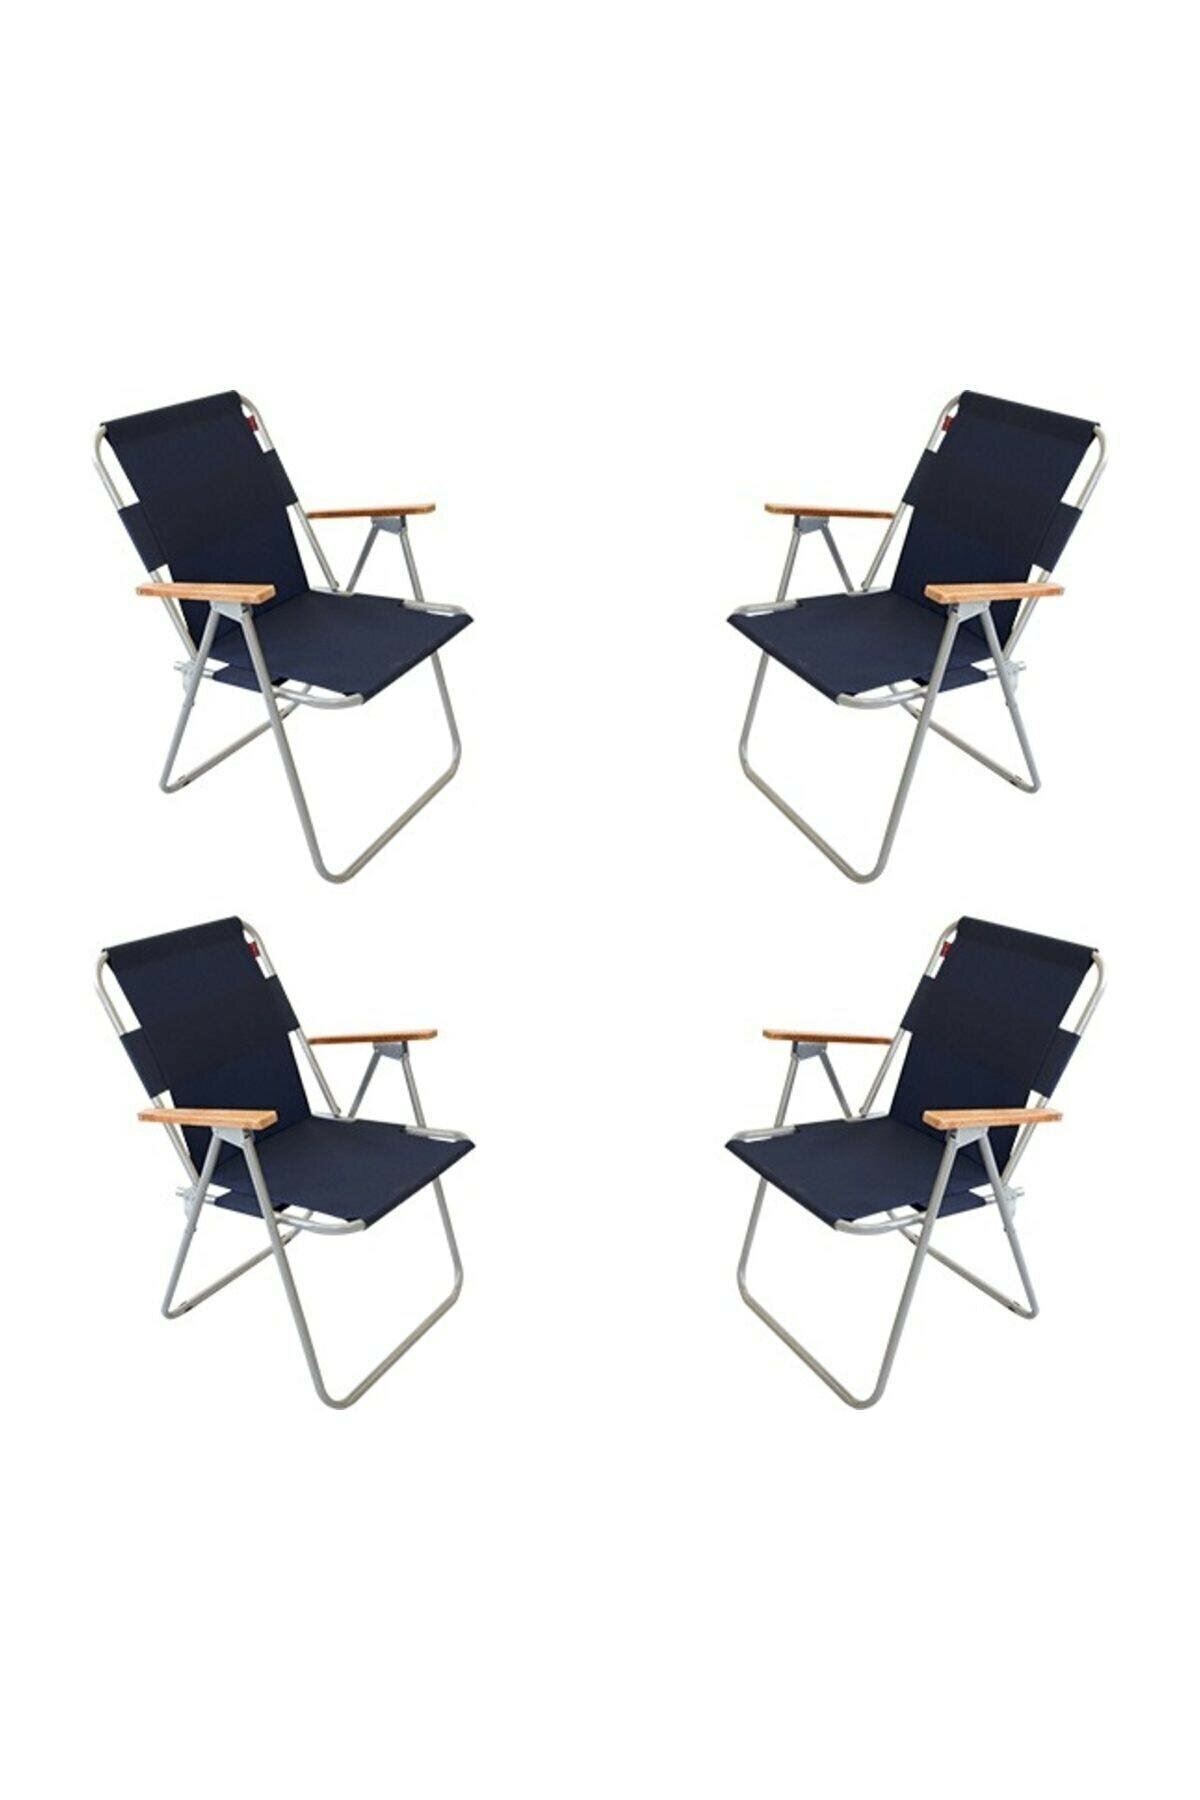 Bofigo 4 Pieces Folding Chair Camping Chair Balcony Chair Foldable Picnic and Garden Chair Navy Blue